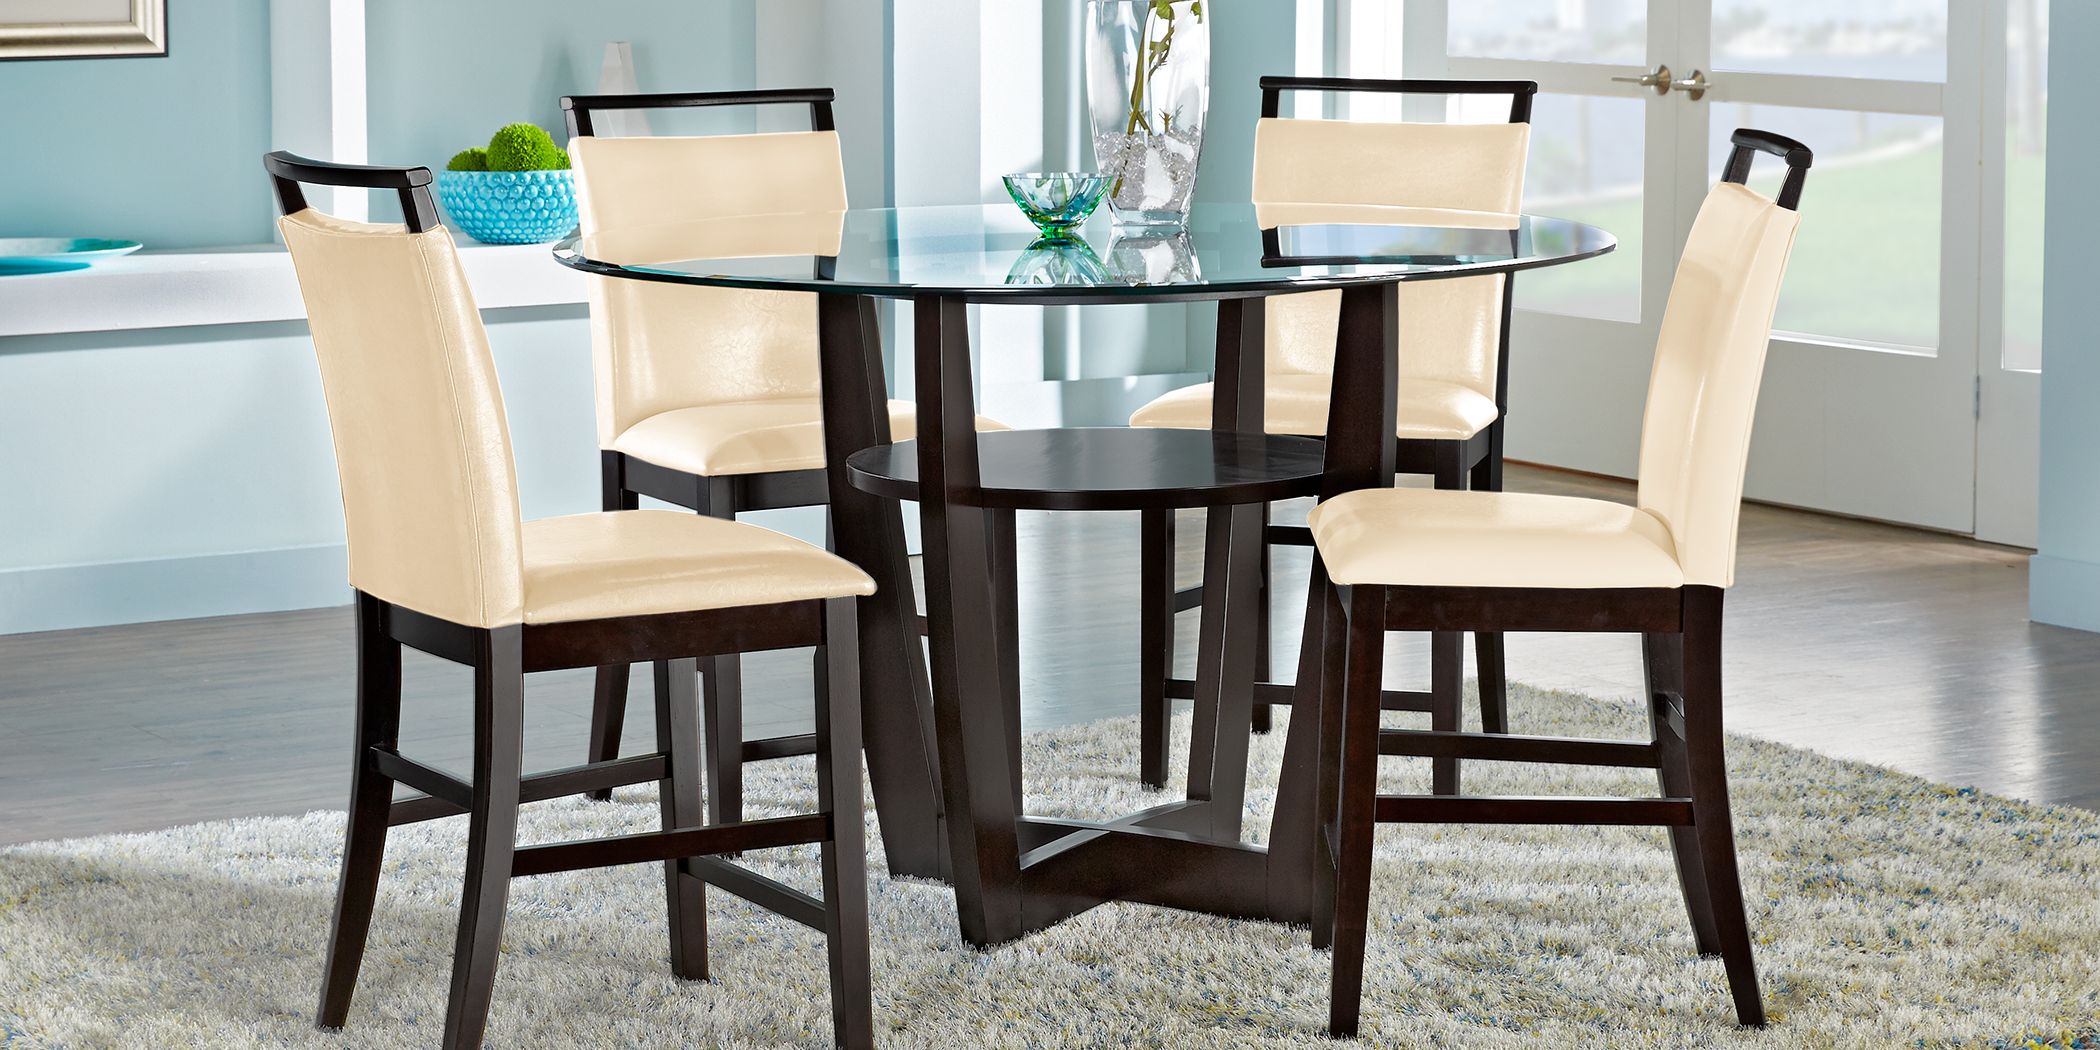 Small Dining Room Sets For Apartments Dorms And Small Spaces